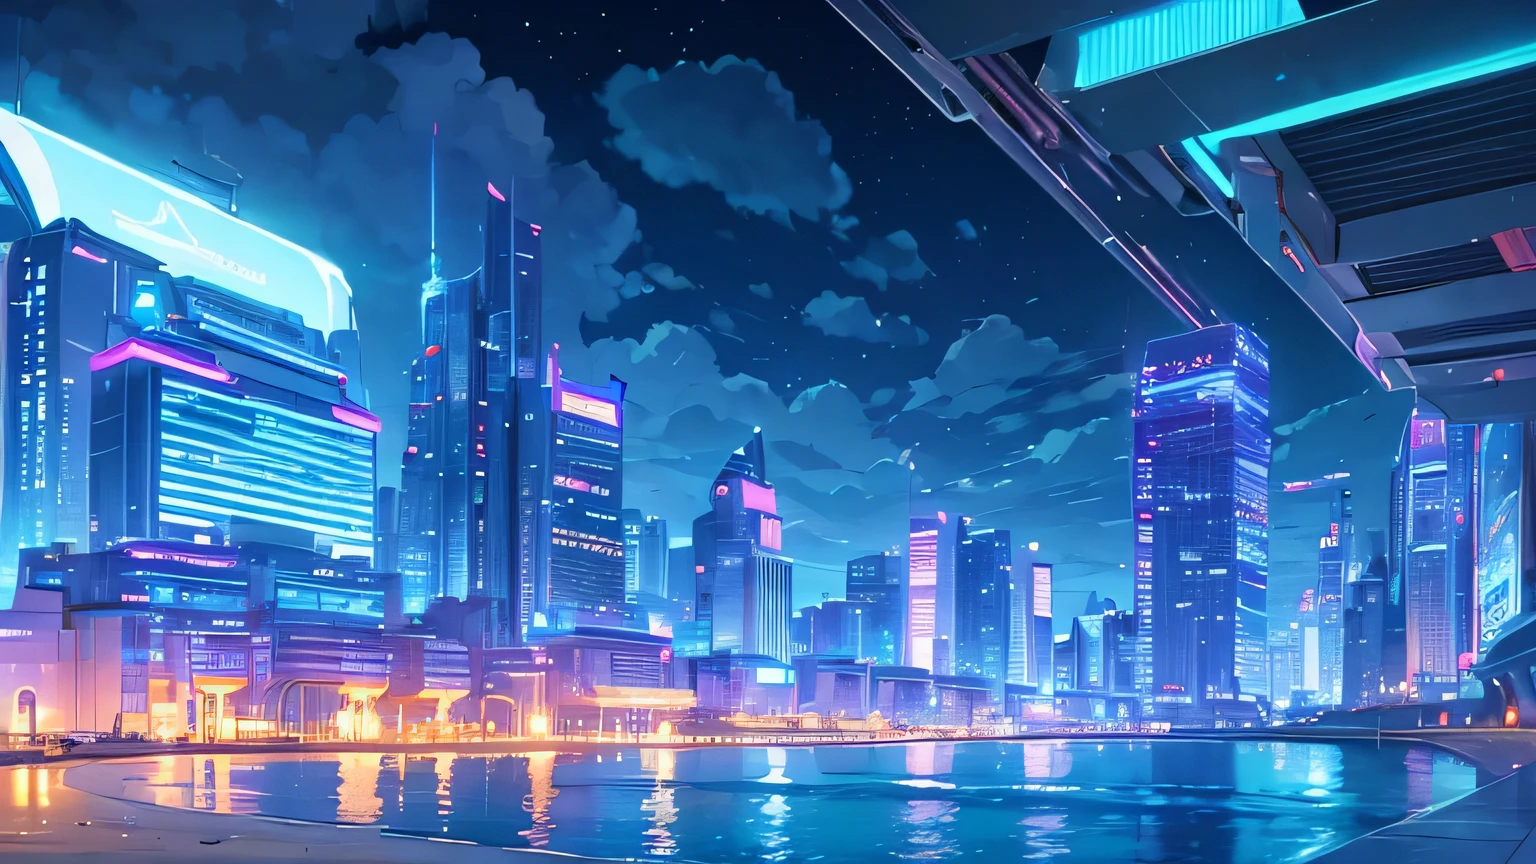 a beach with a coast and futuristic buildings with neon lights, stars and clouds, it's in the night with the sky, the moon and clouds, purple and blue